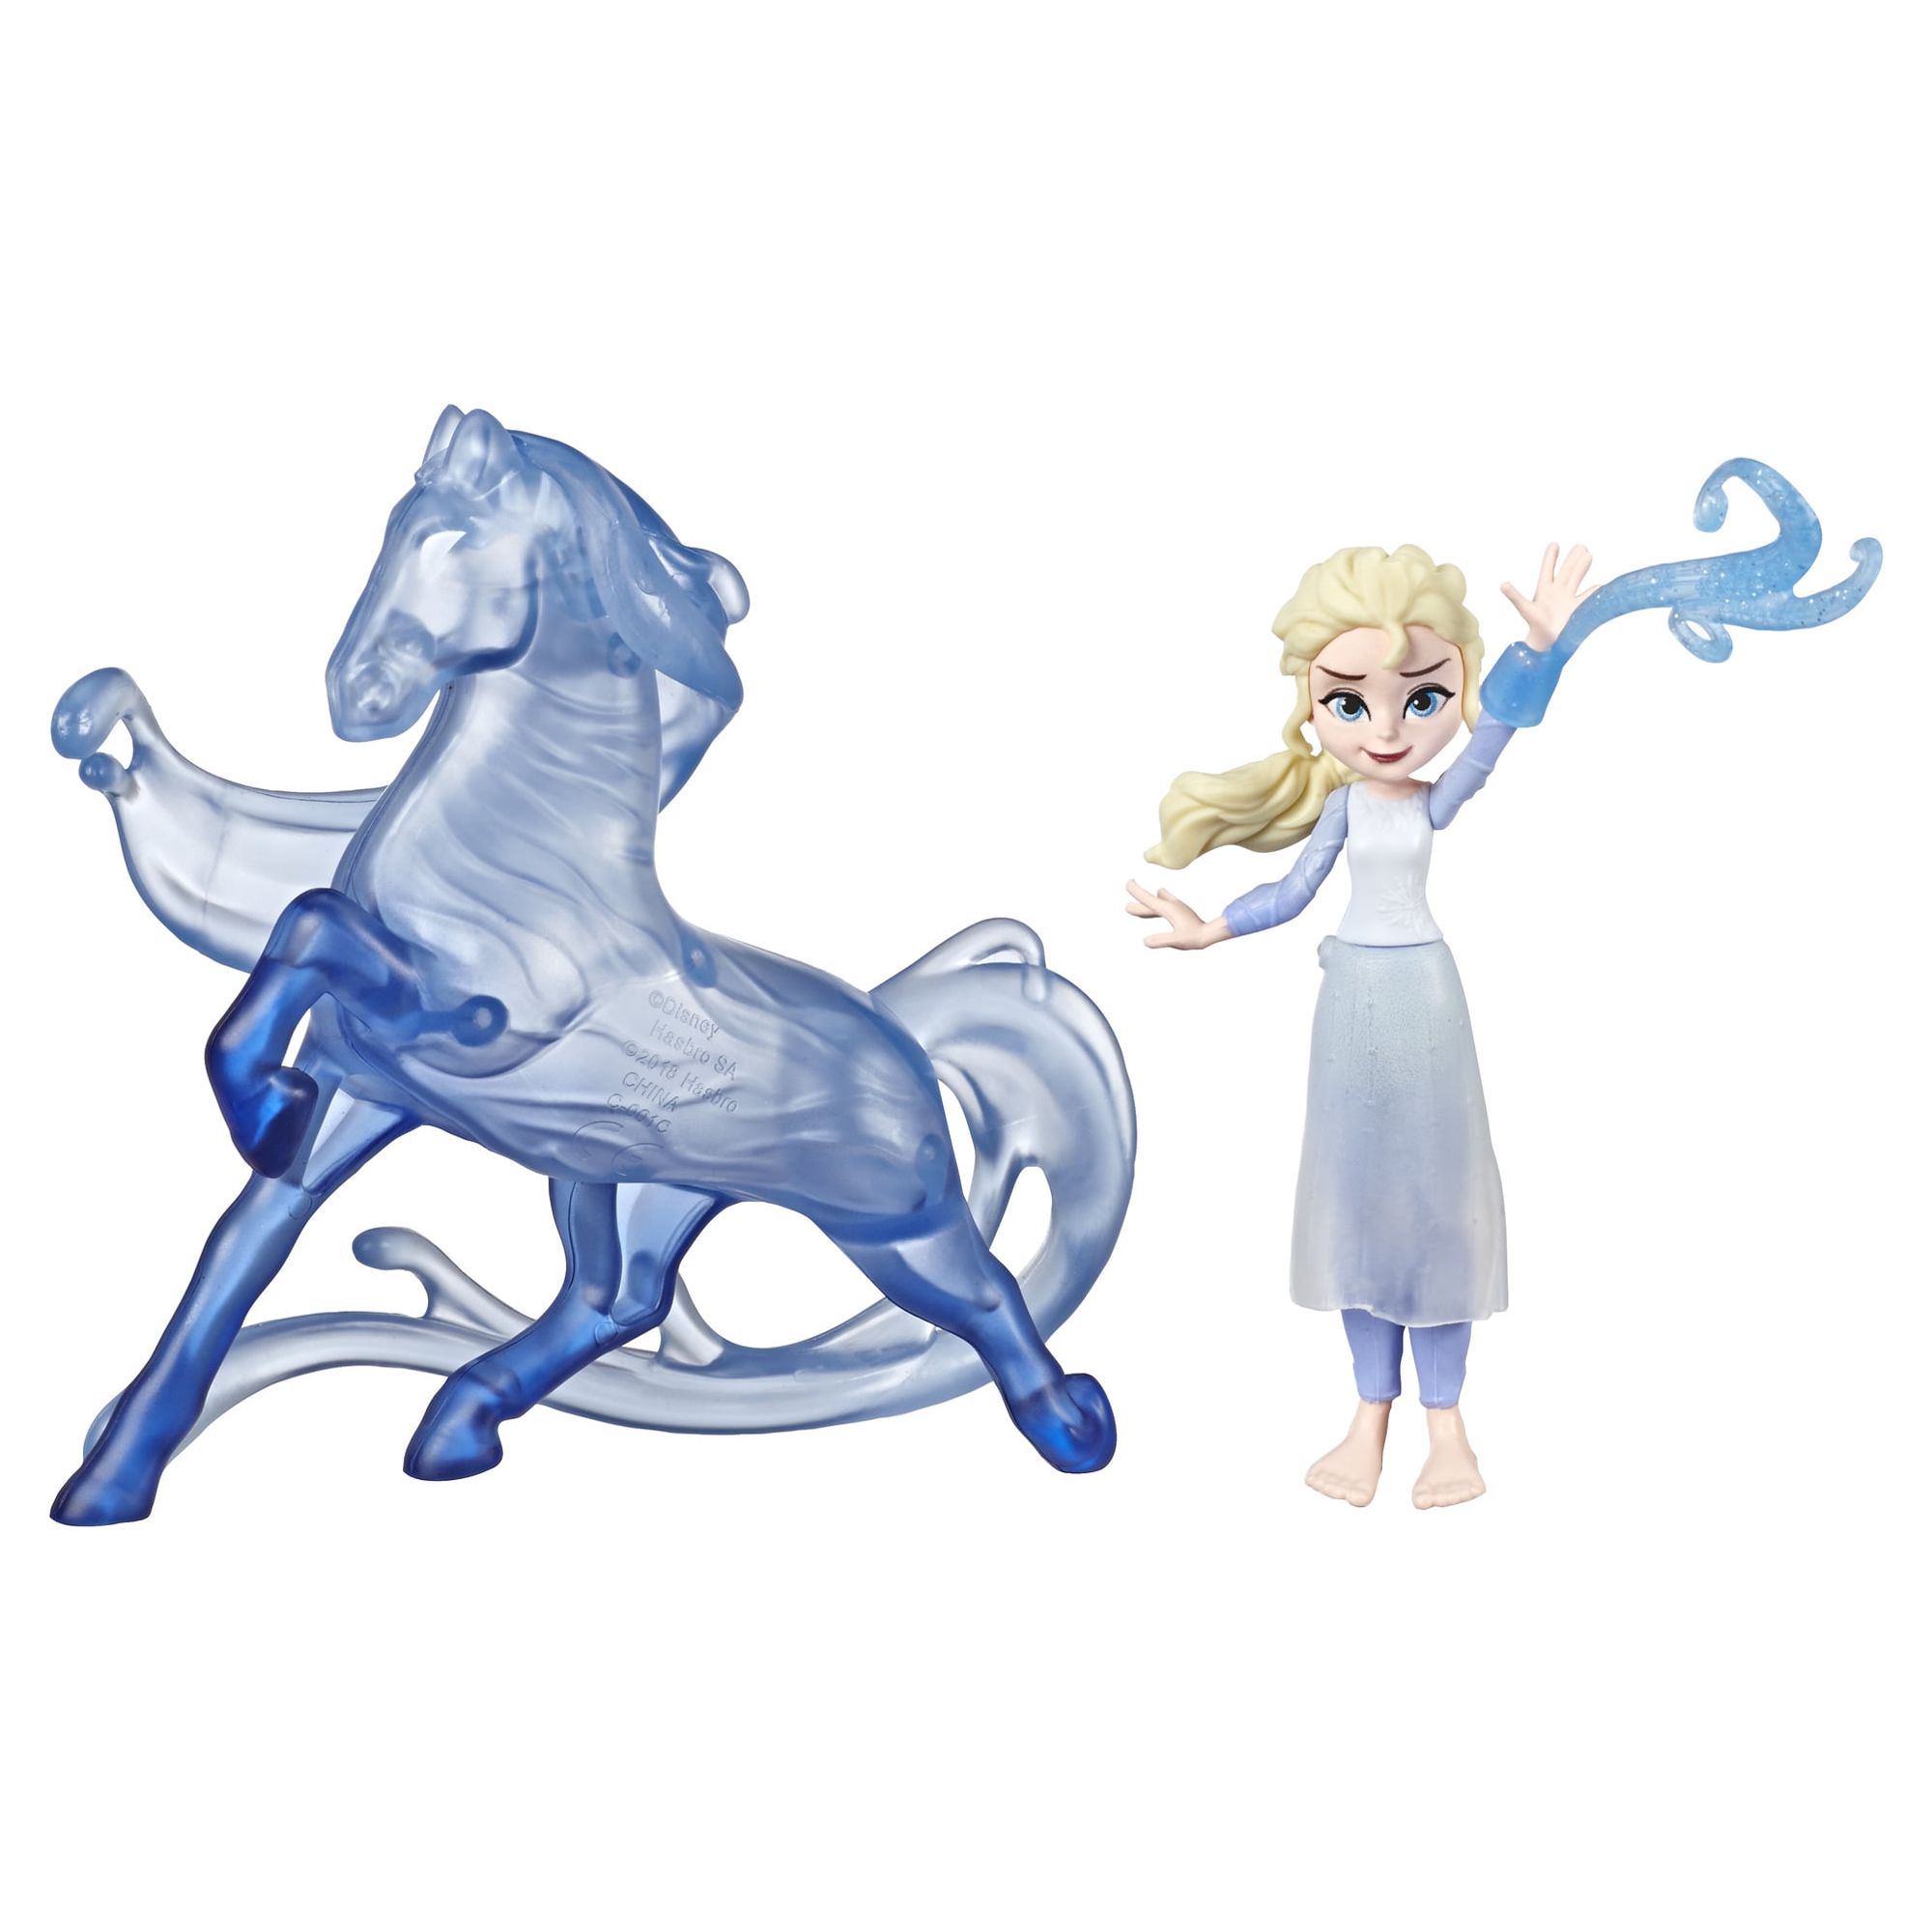 Disney Frozen 2 Elsa and the Nokk Small Doll Playset, Includes Doll and Nokk Figure - image 4 of 8